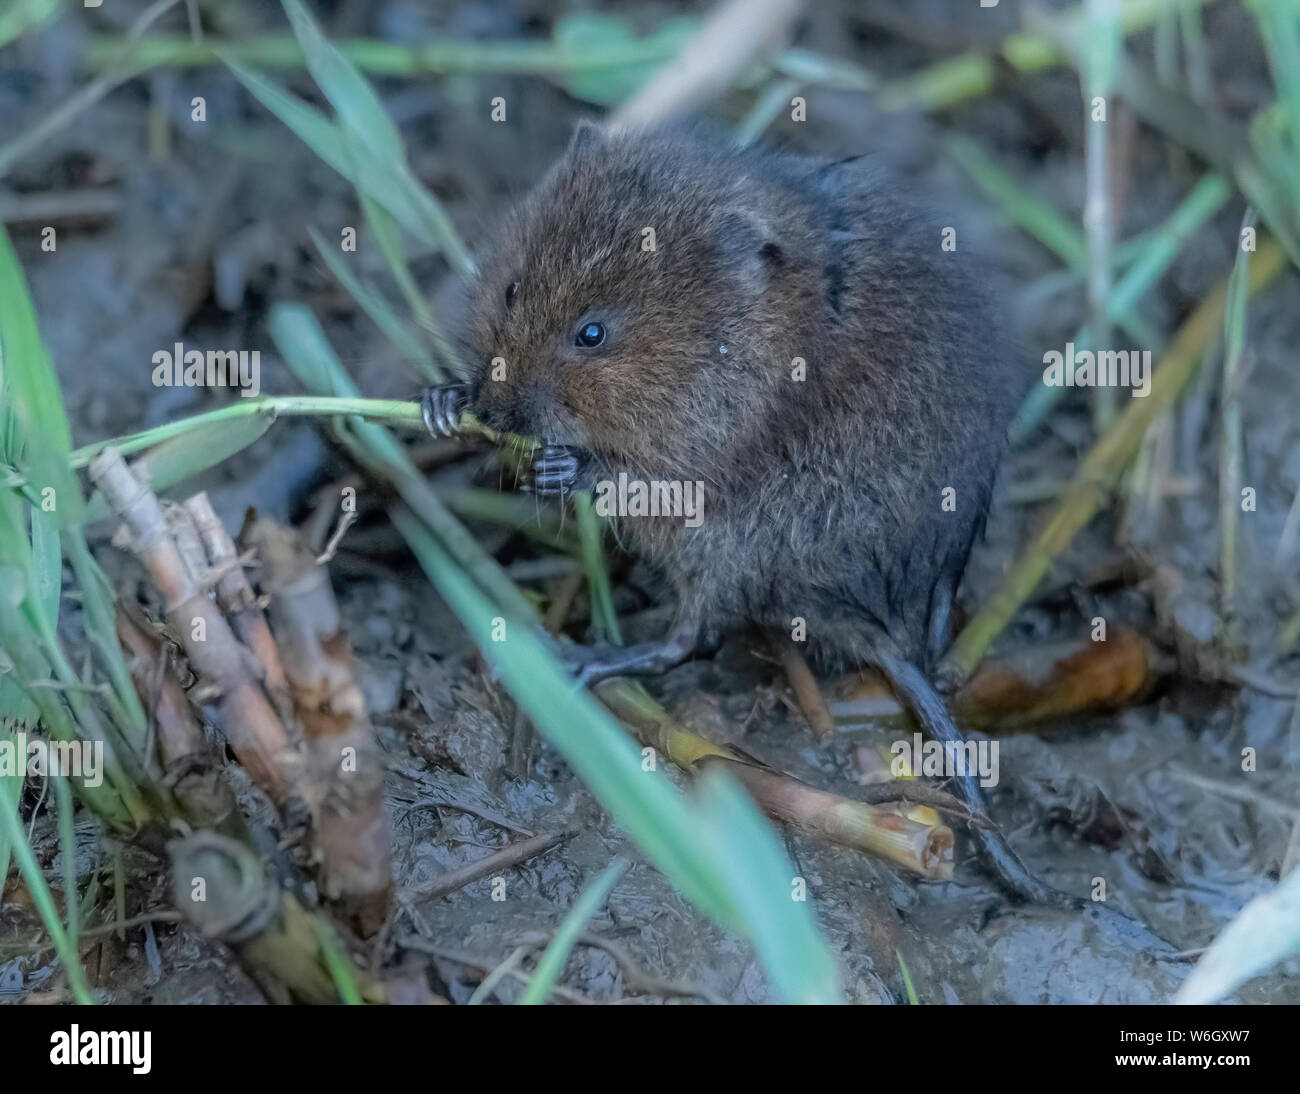 Water Vole eating reeds Stock Photo